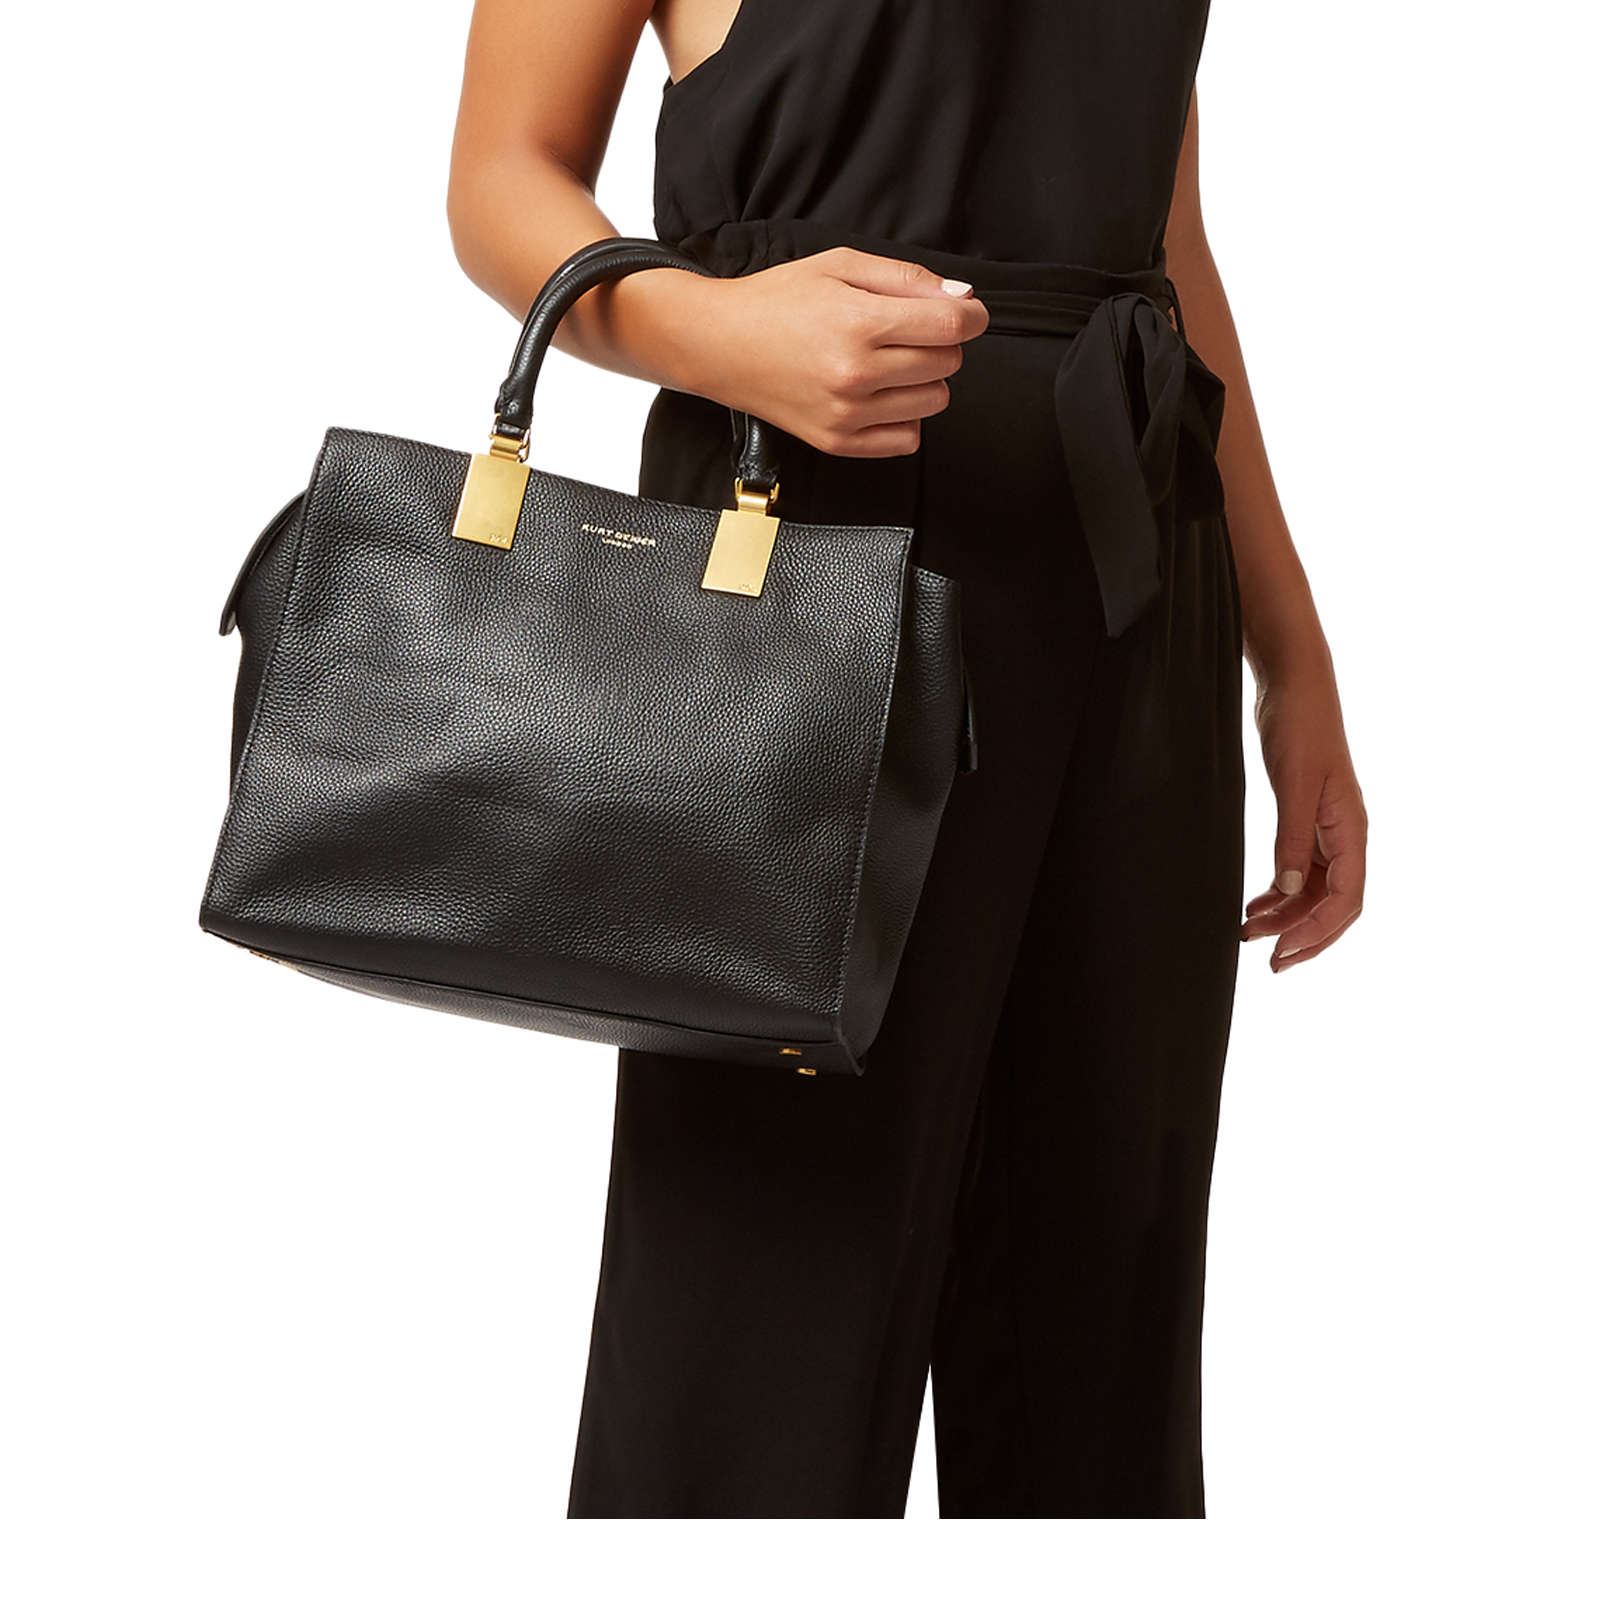 LEATHER EMMA TOTE - KURT GEIGER LONDON DAY BAGS